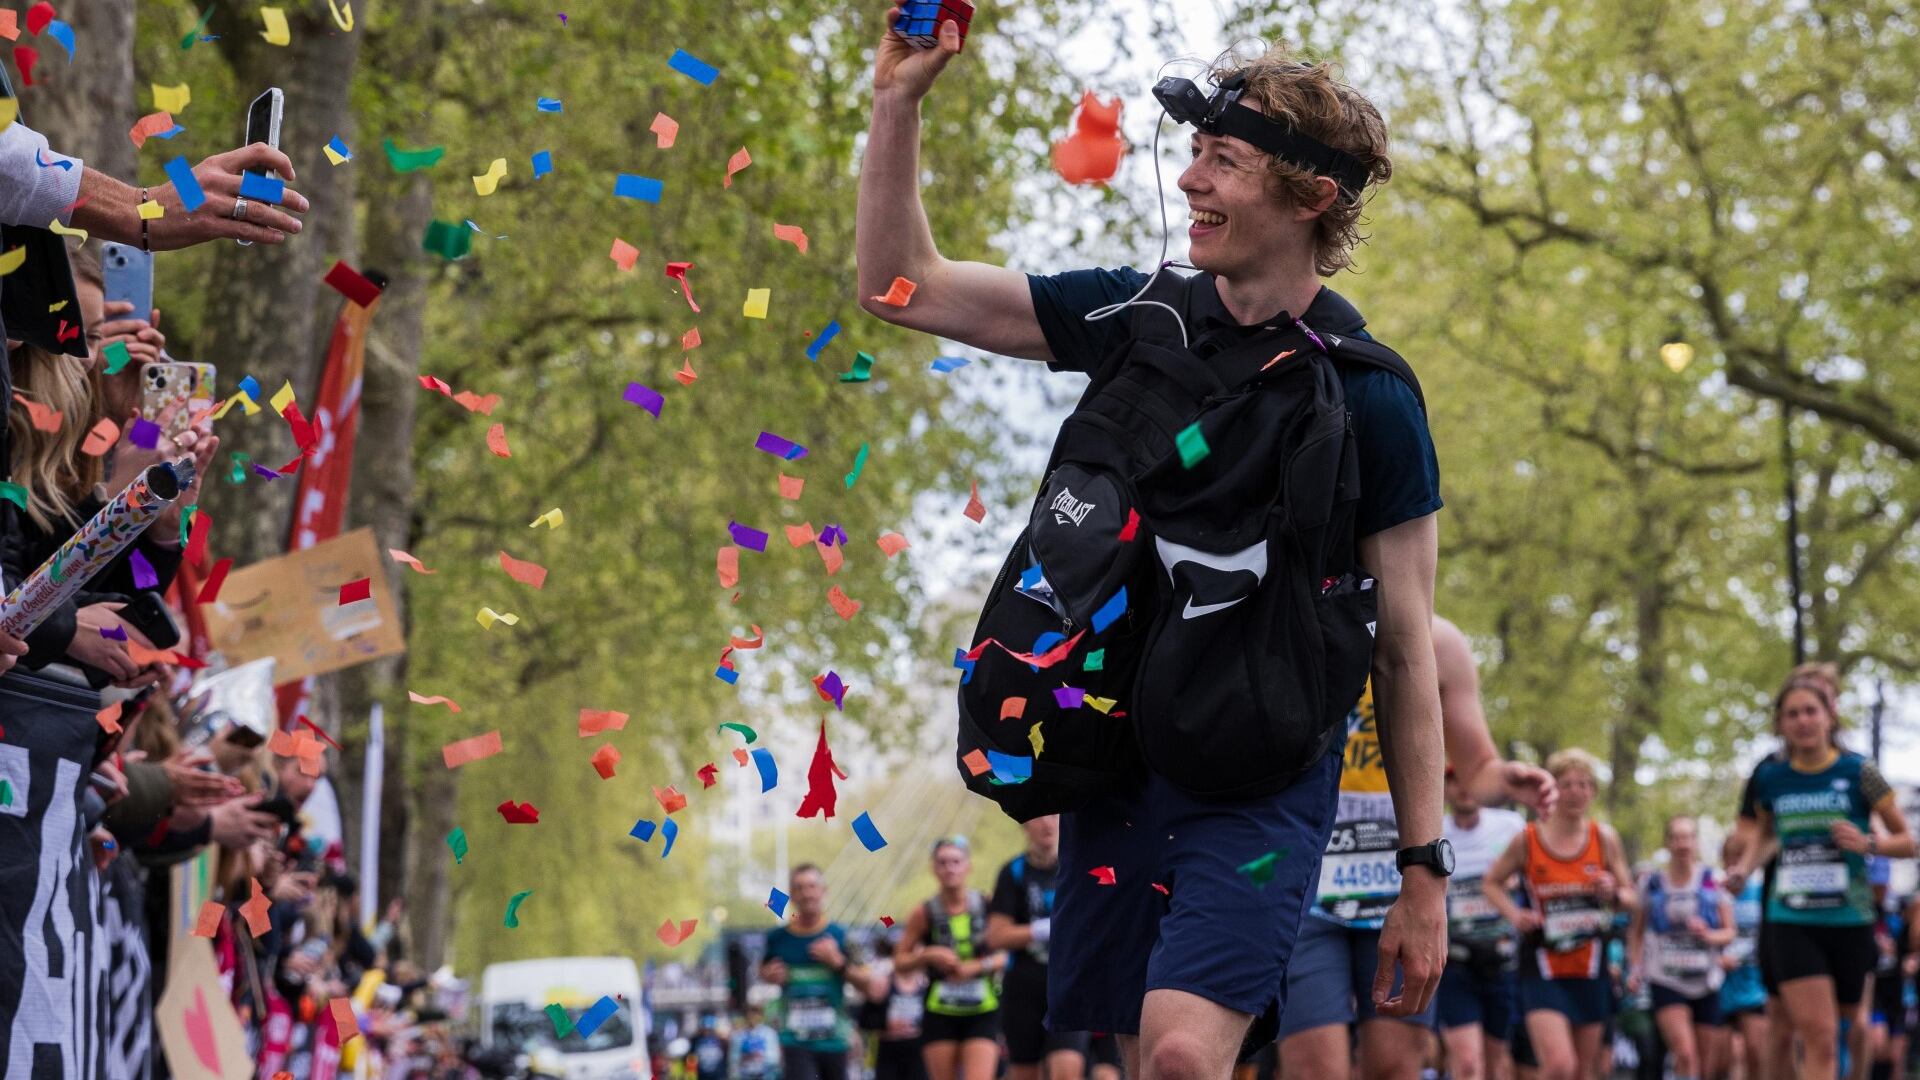 George Scholey has broken the world record for the most Rubik’s Cubes solved while running a marathon